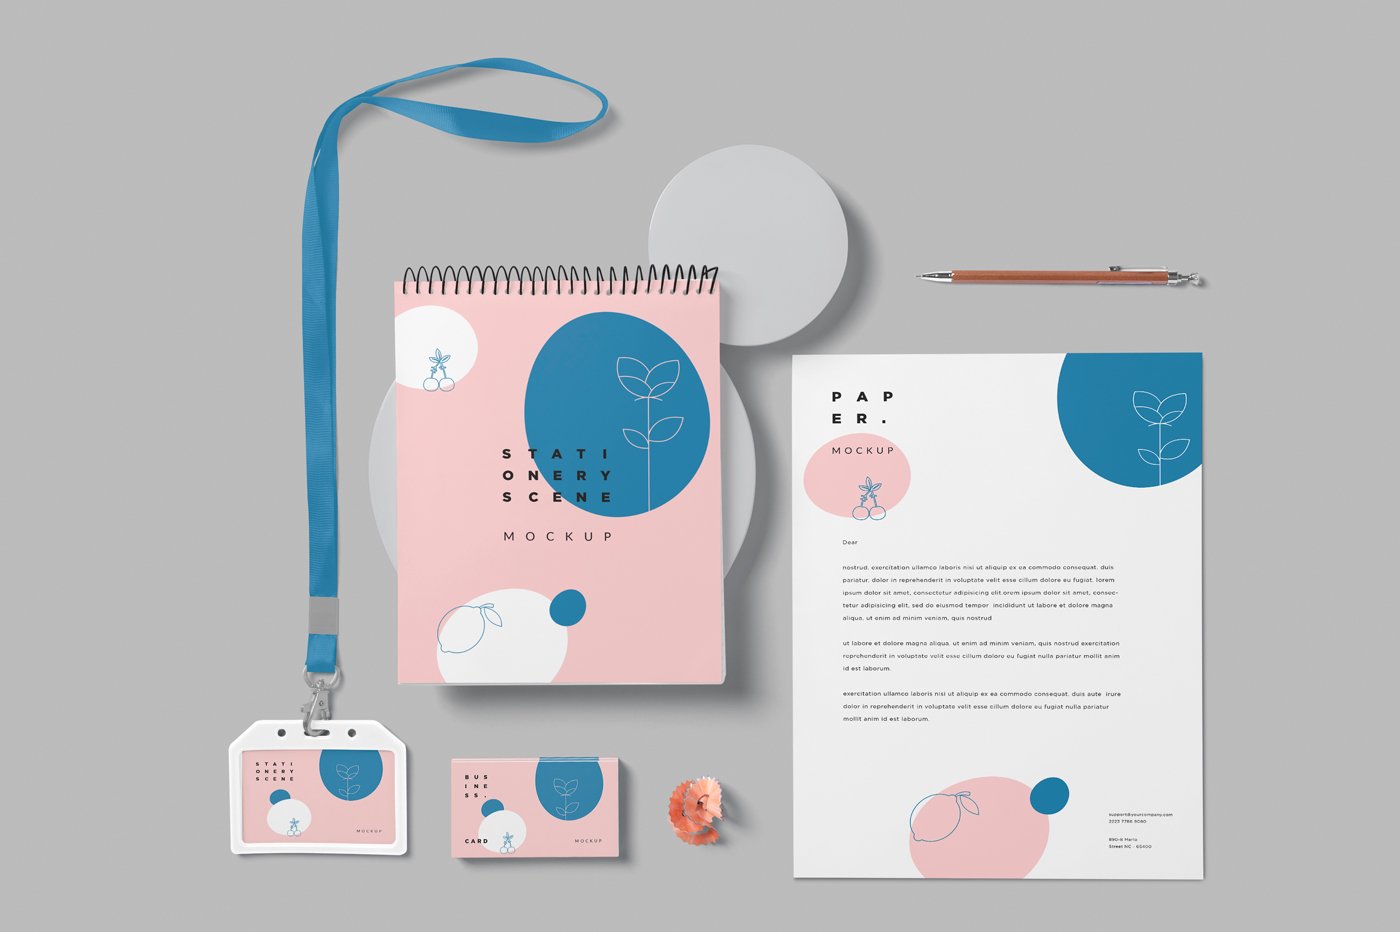 Stationery Mockup Scenes cover image.